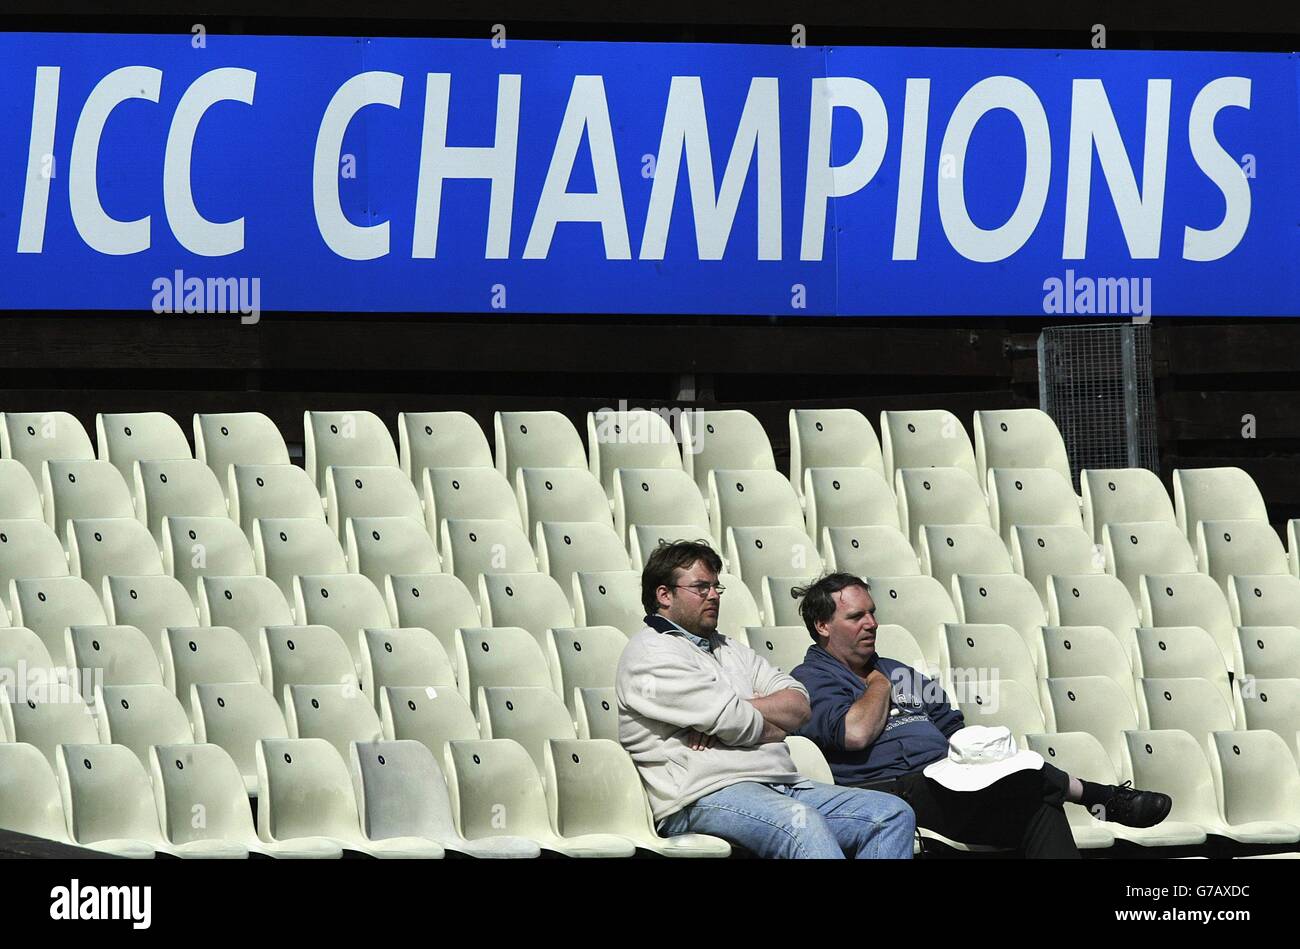 Two cricket fans surrounded by empty seating watch England's victory over Zimbabwe at Edgbaston during their ICC Champions Trophy match at Edgbaston, Birmingham. Stock Photo